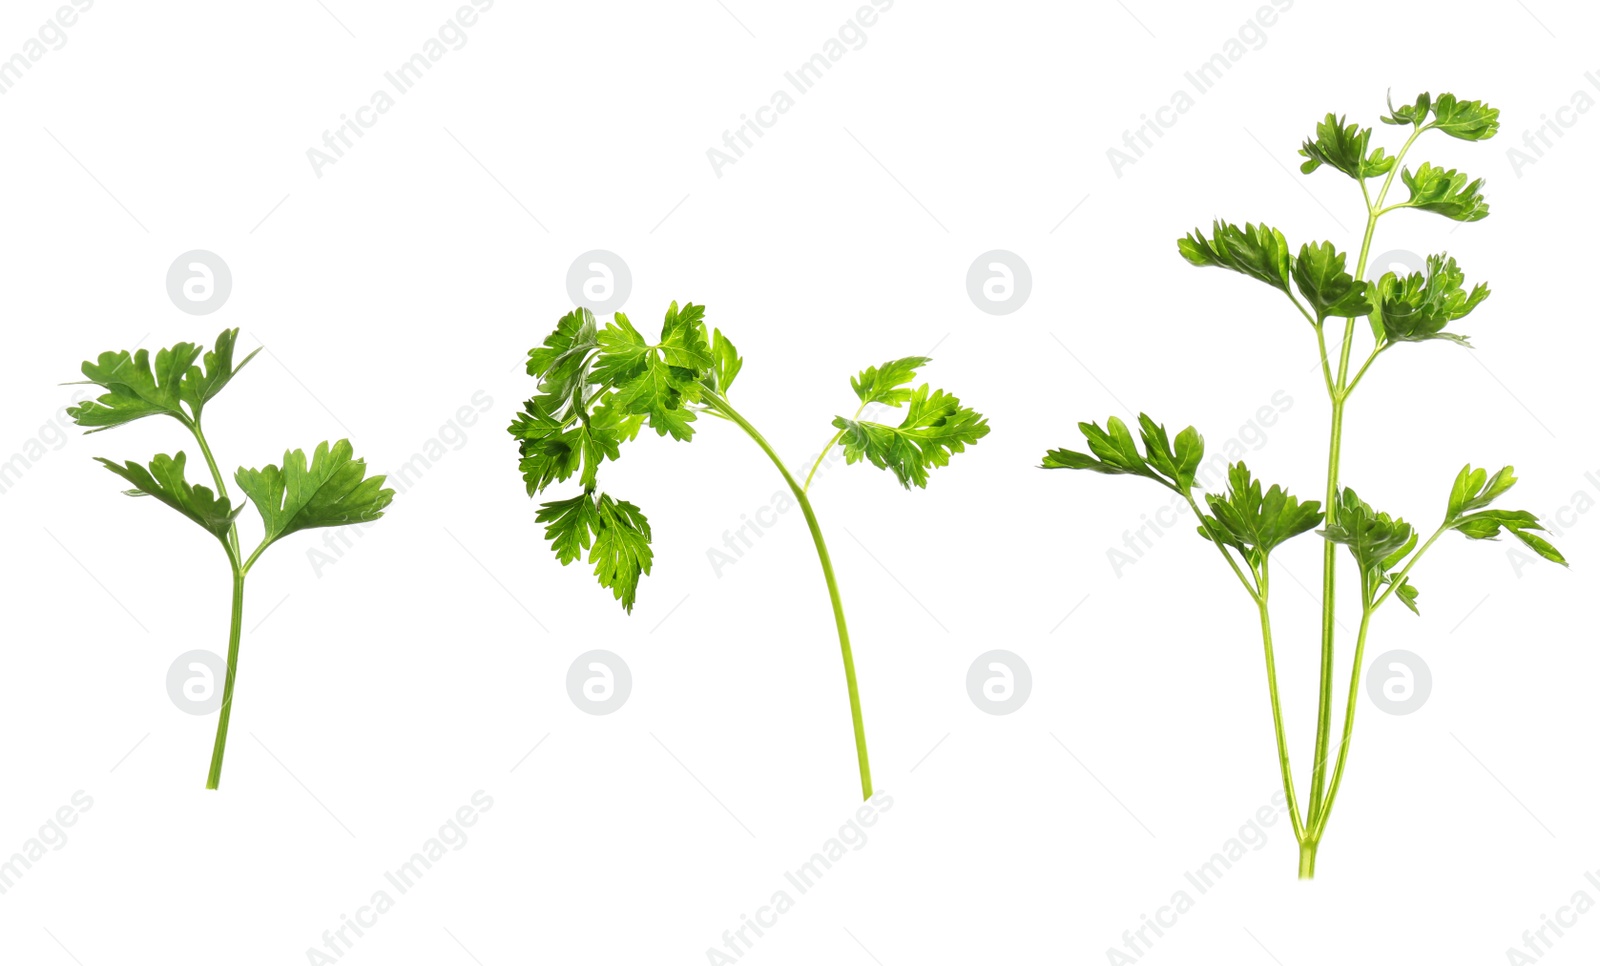 Image of Set with green parsley on white background